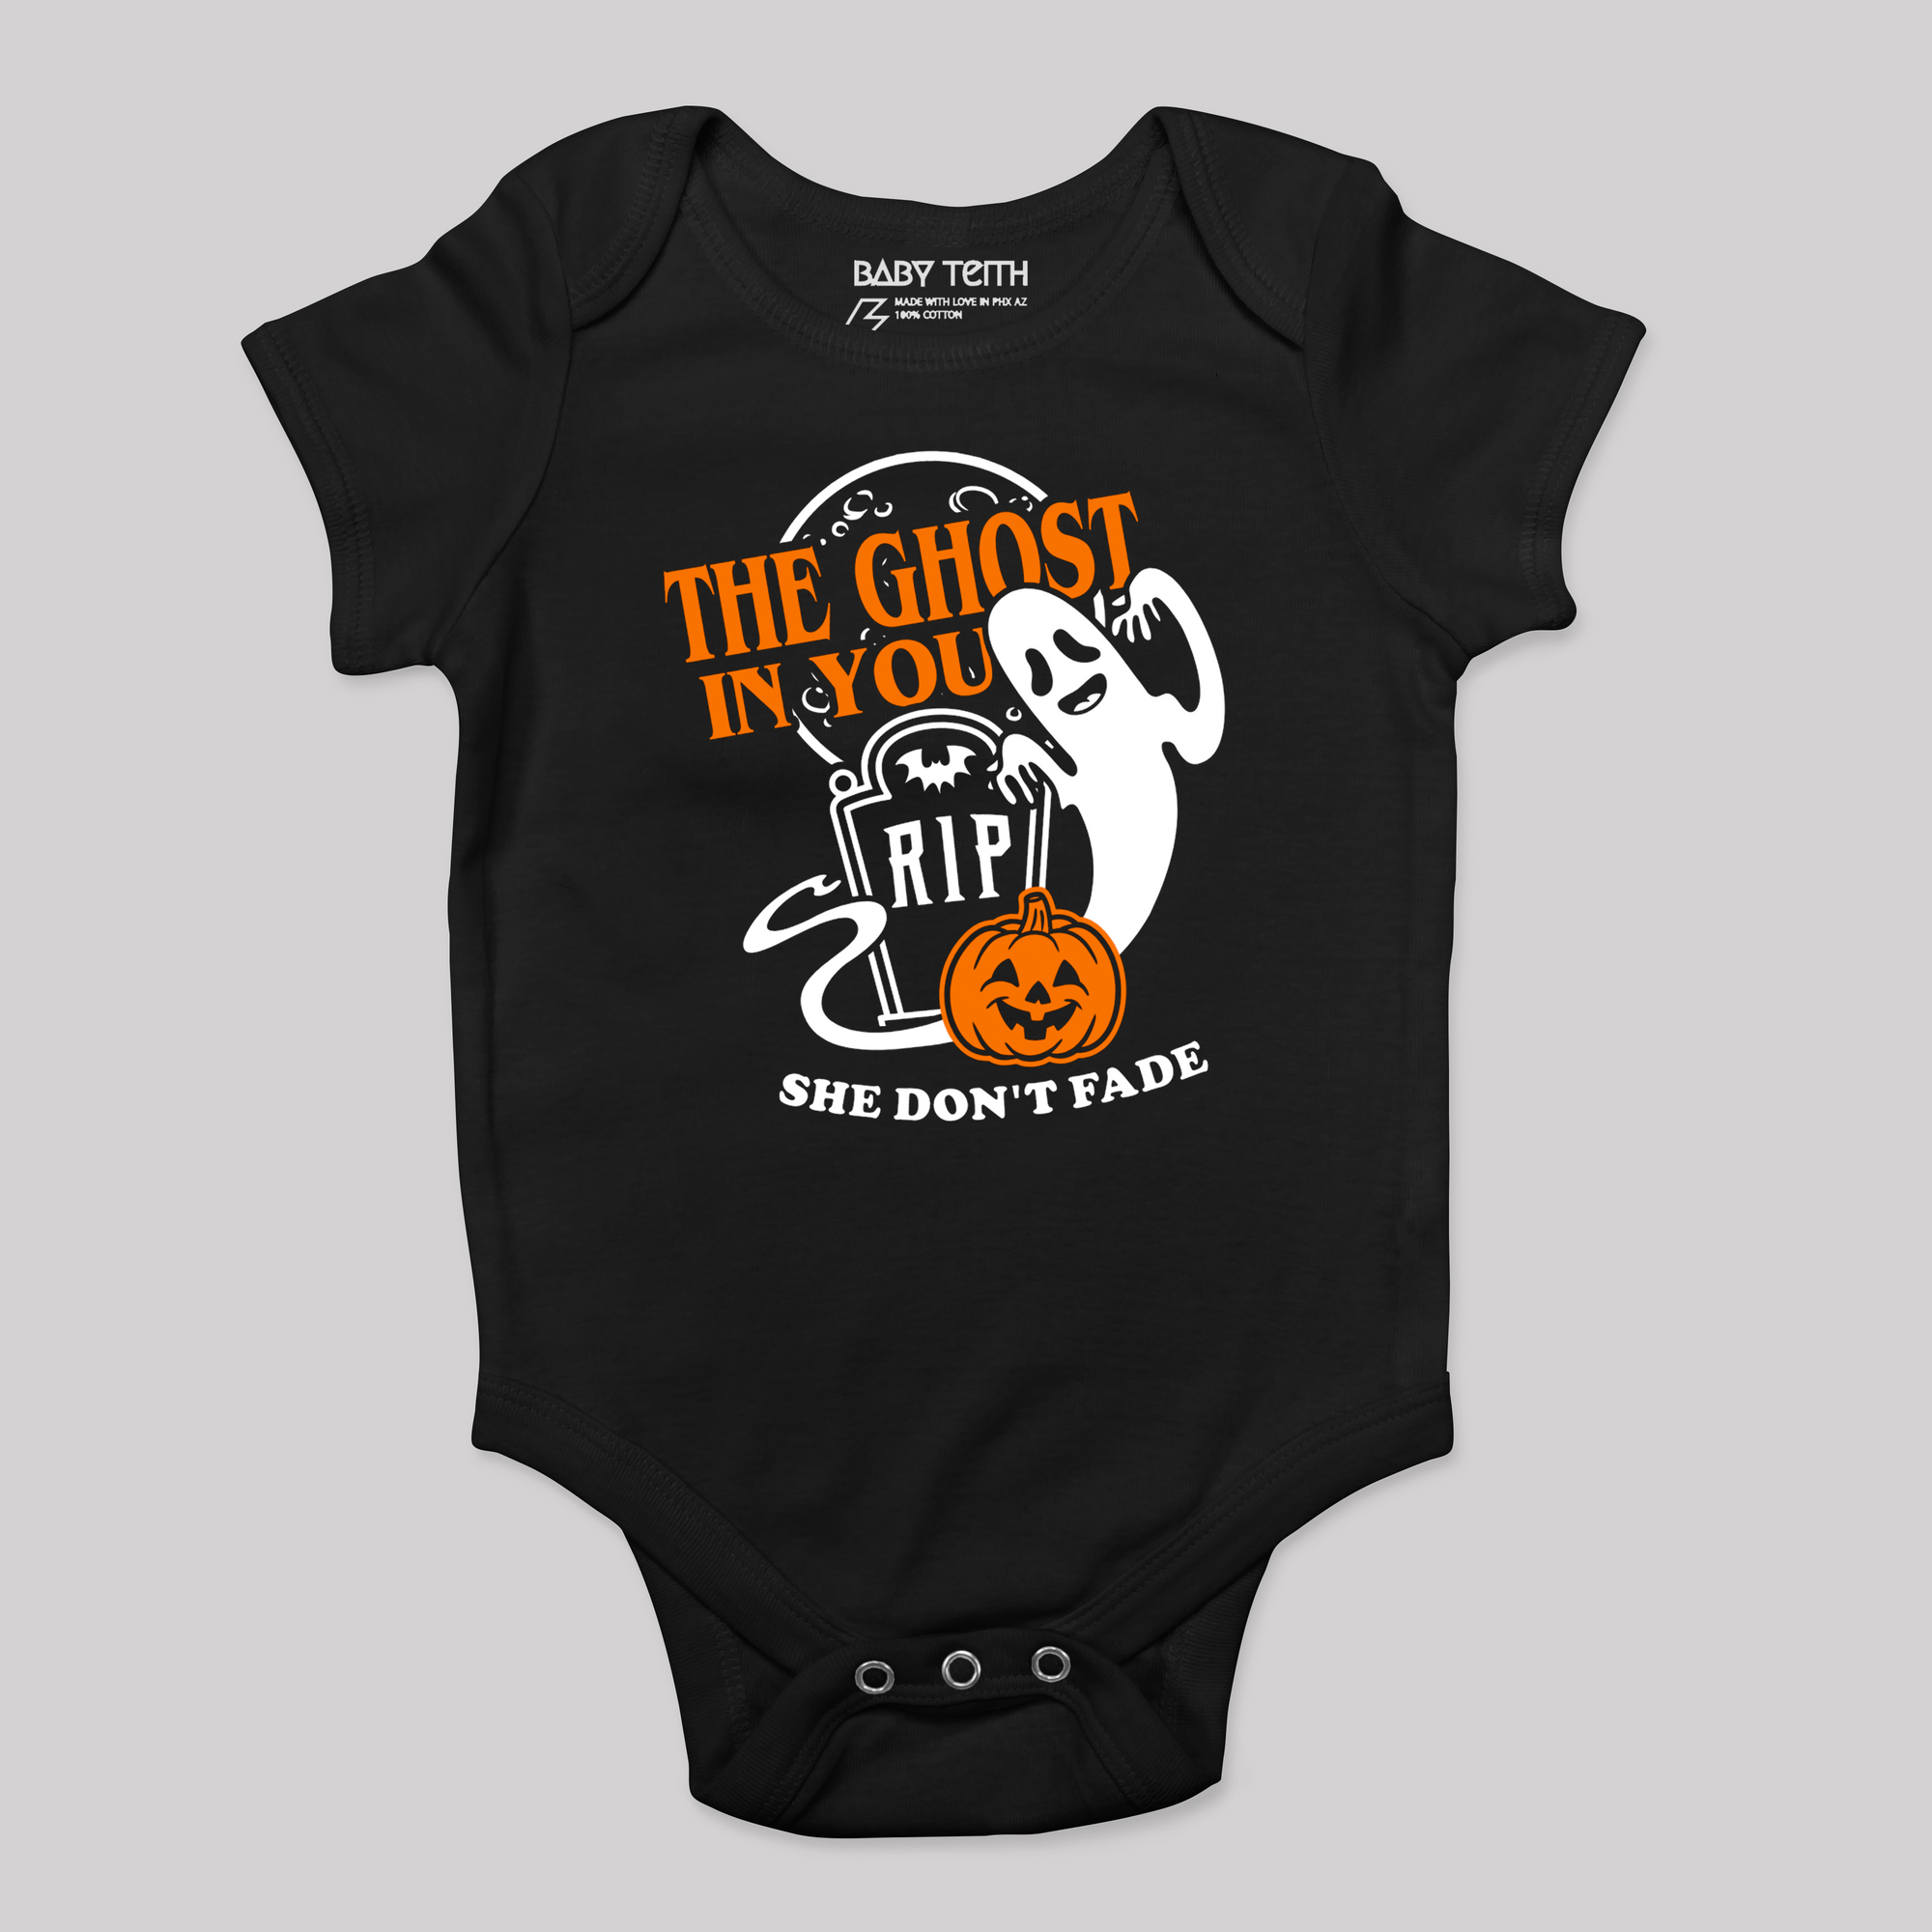 The Ghost In You Baby Bodysuit